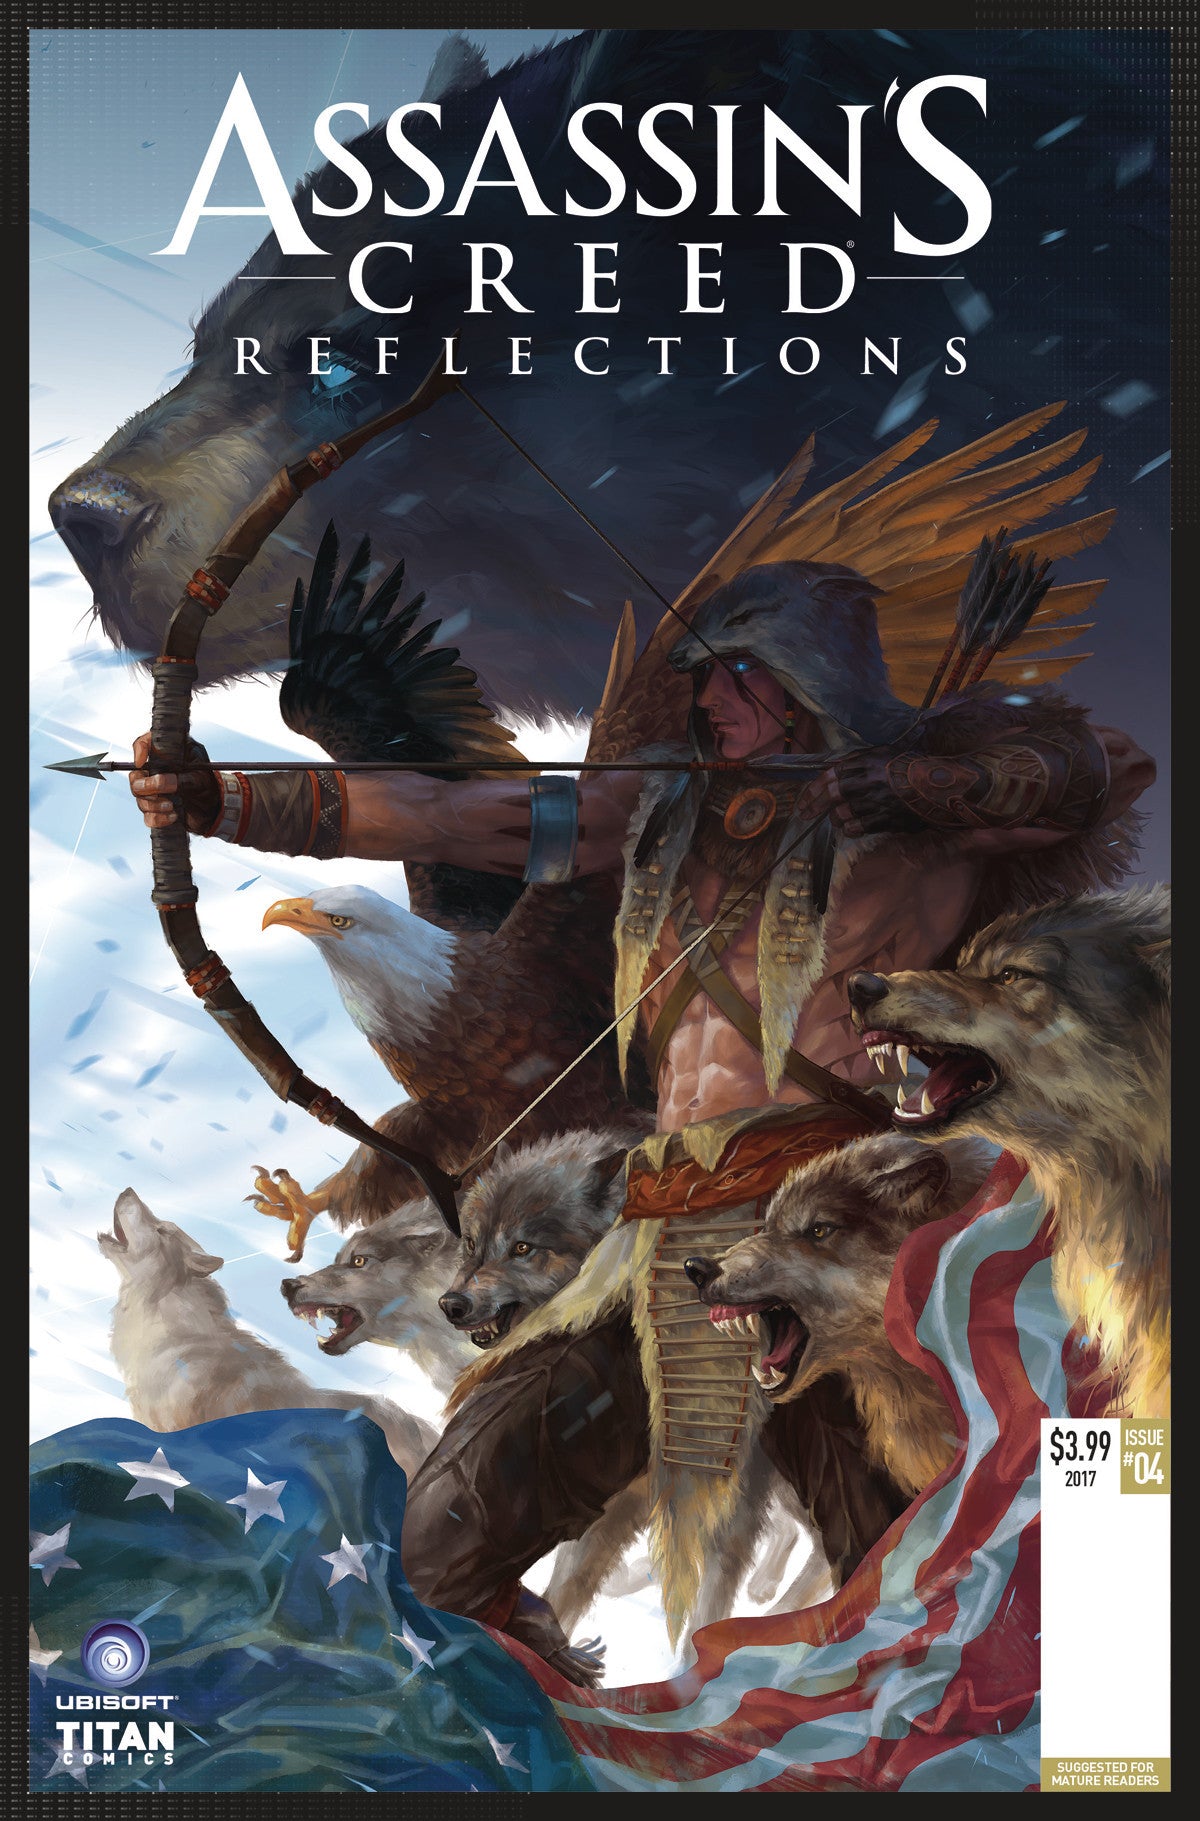 ASSASSINS CREED REFLECTIONS #4 (OF 4) CVR A SUNSET AGAIN (MR) COVER